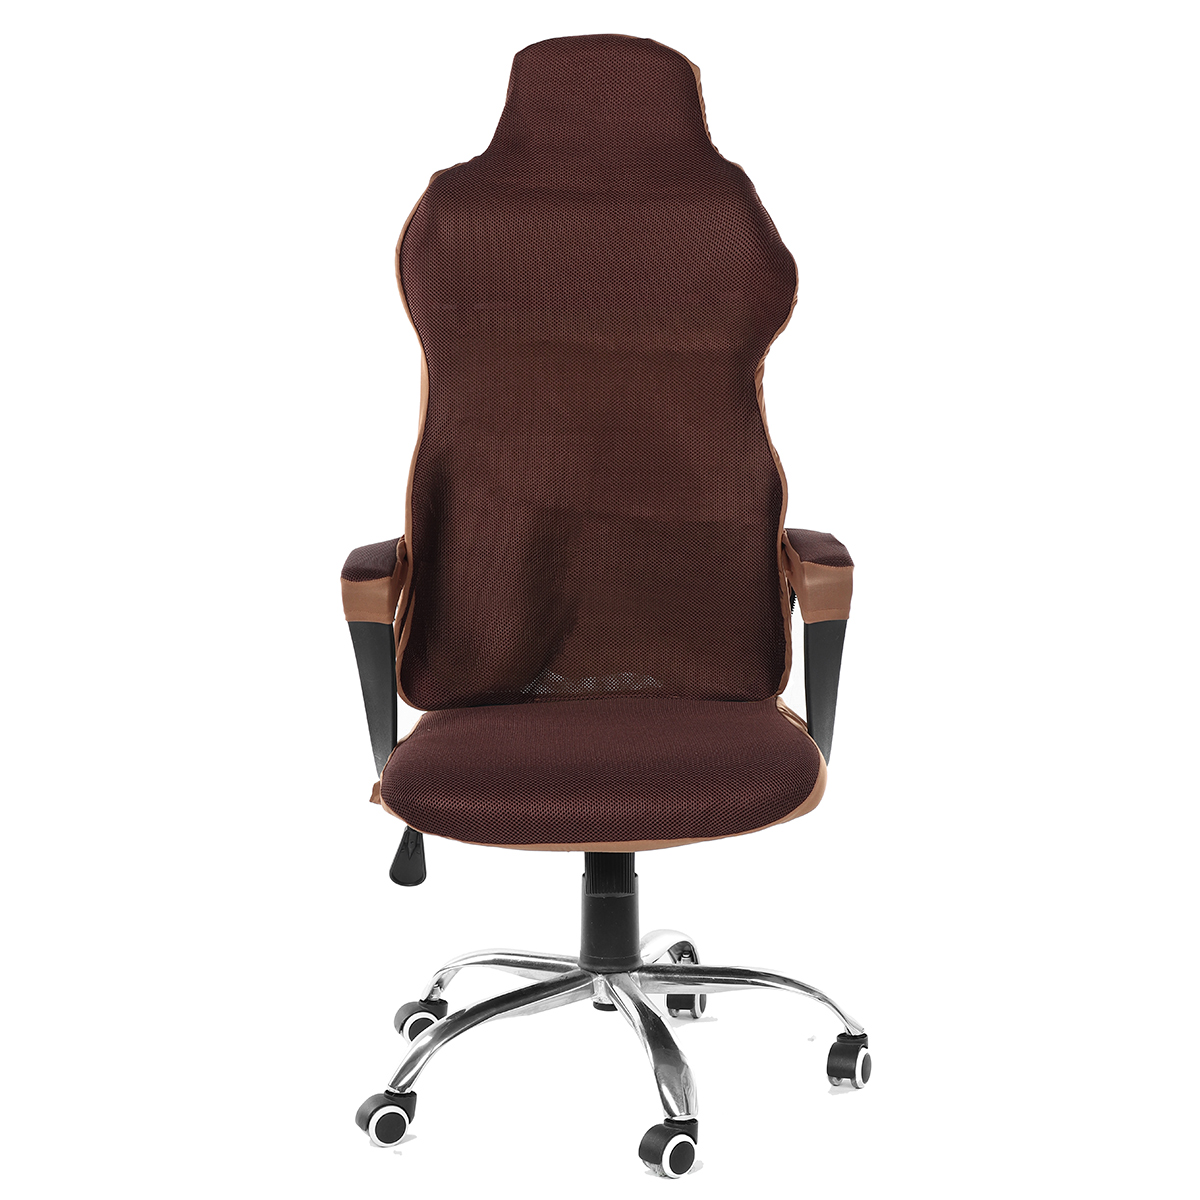 Mesh-Gaming-Chair-Elastic-Chair-Cover-Office-Chair-Dustproof-Chair-Cover-Home-Office-Solid-Color-Cha-1827333-5